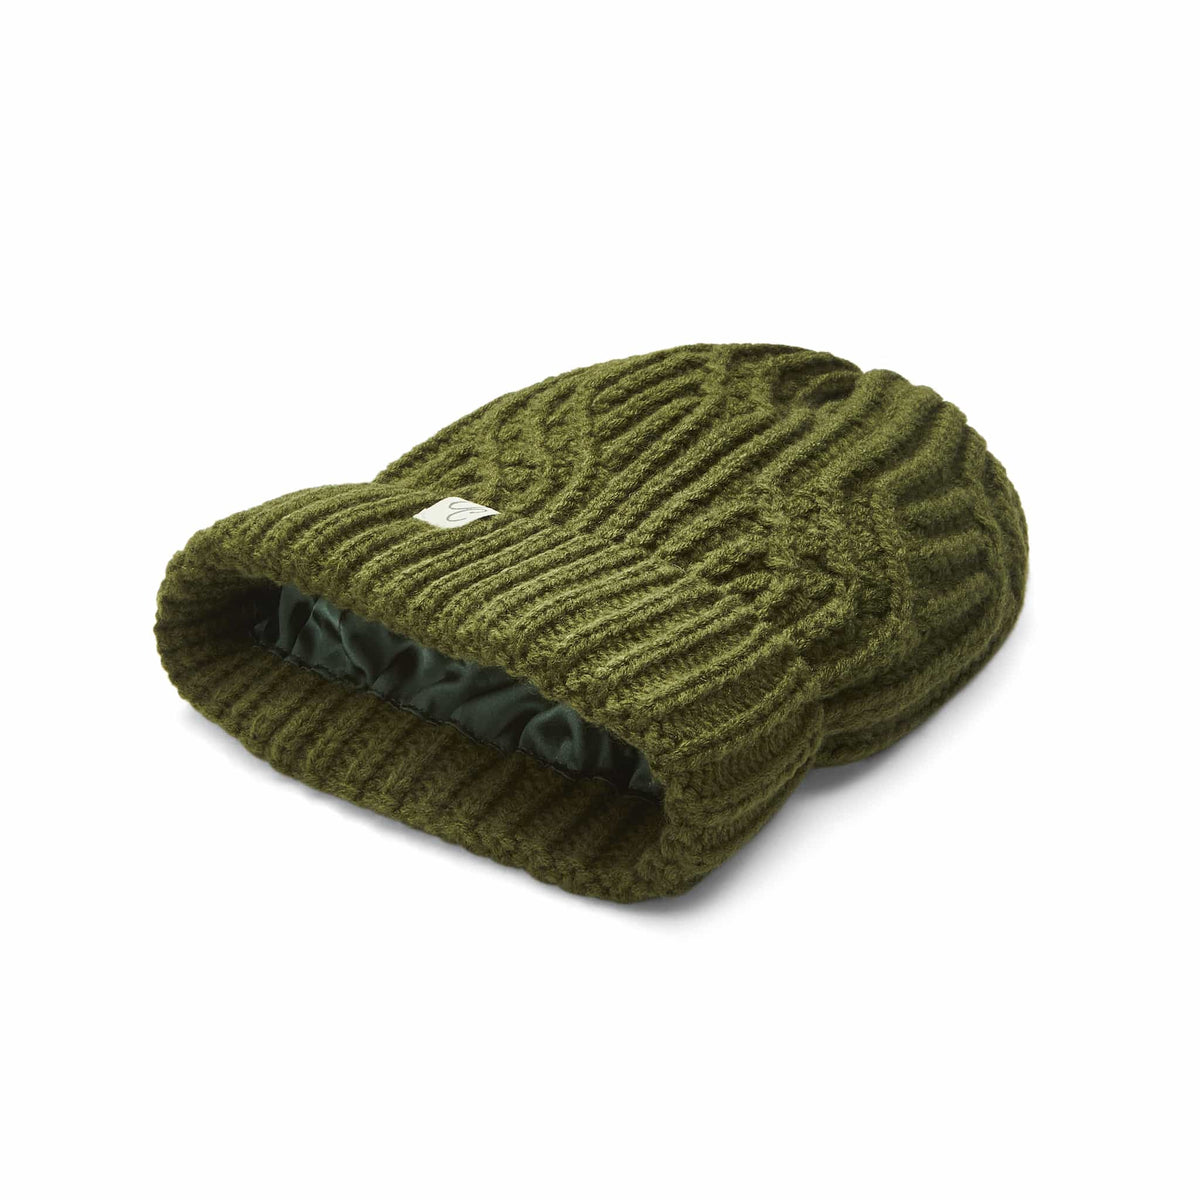 Only Curls Satin Lined Knitted Beanie Hat - Olive - Only Curls